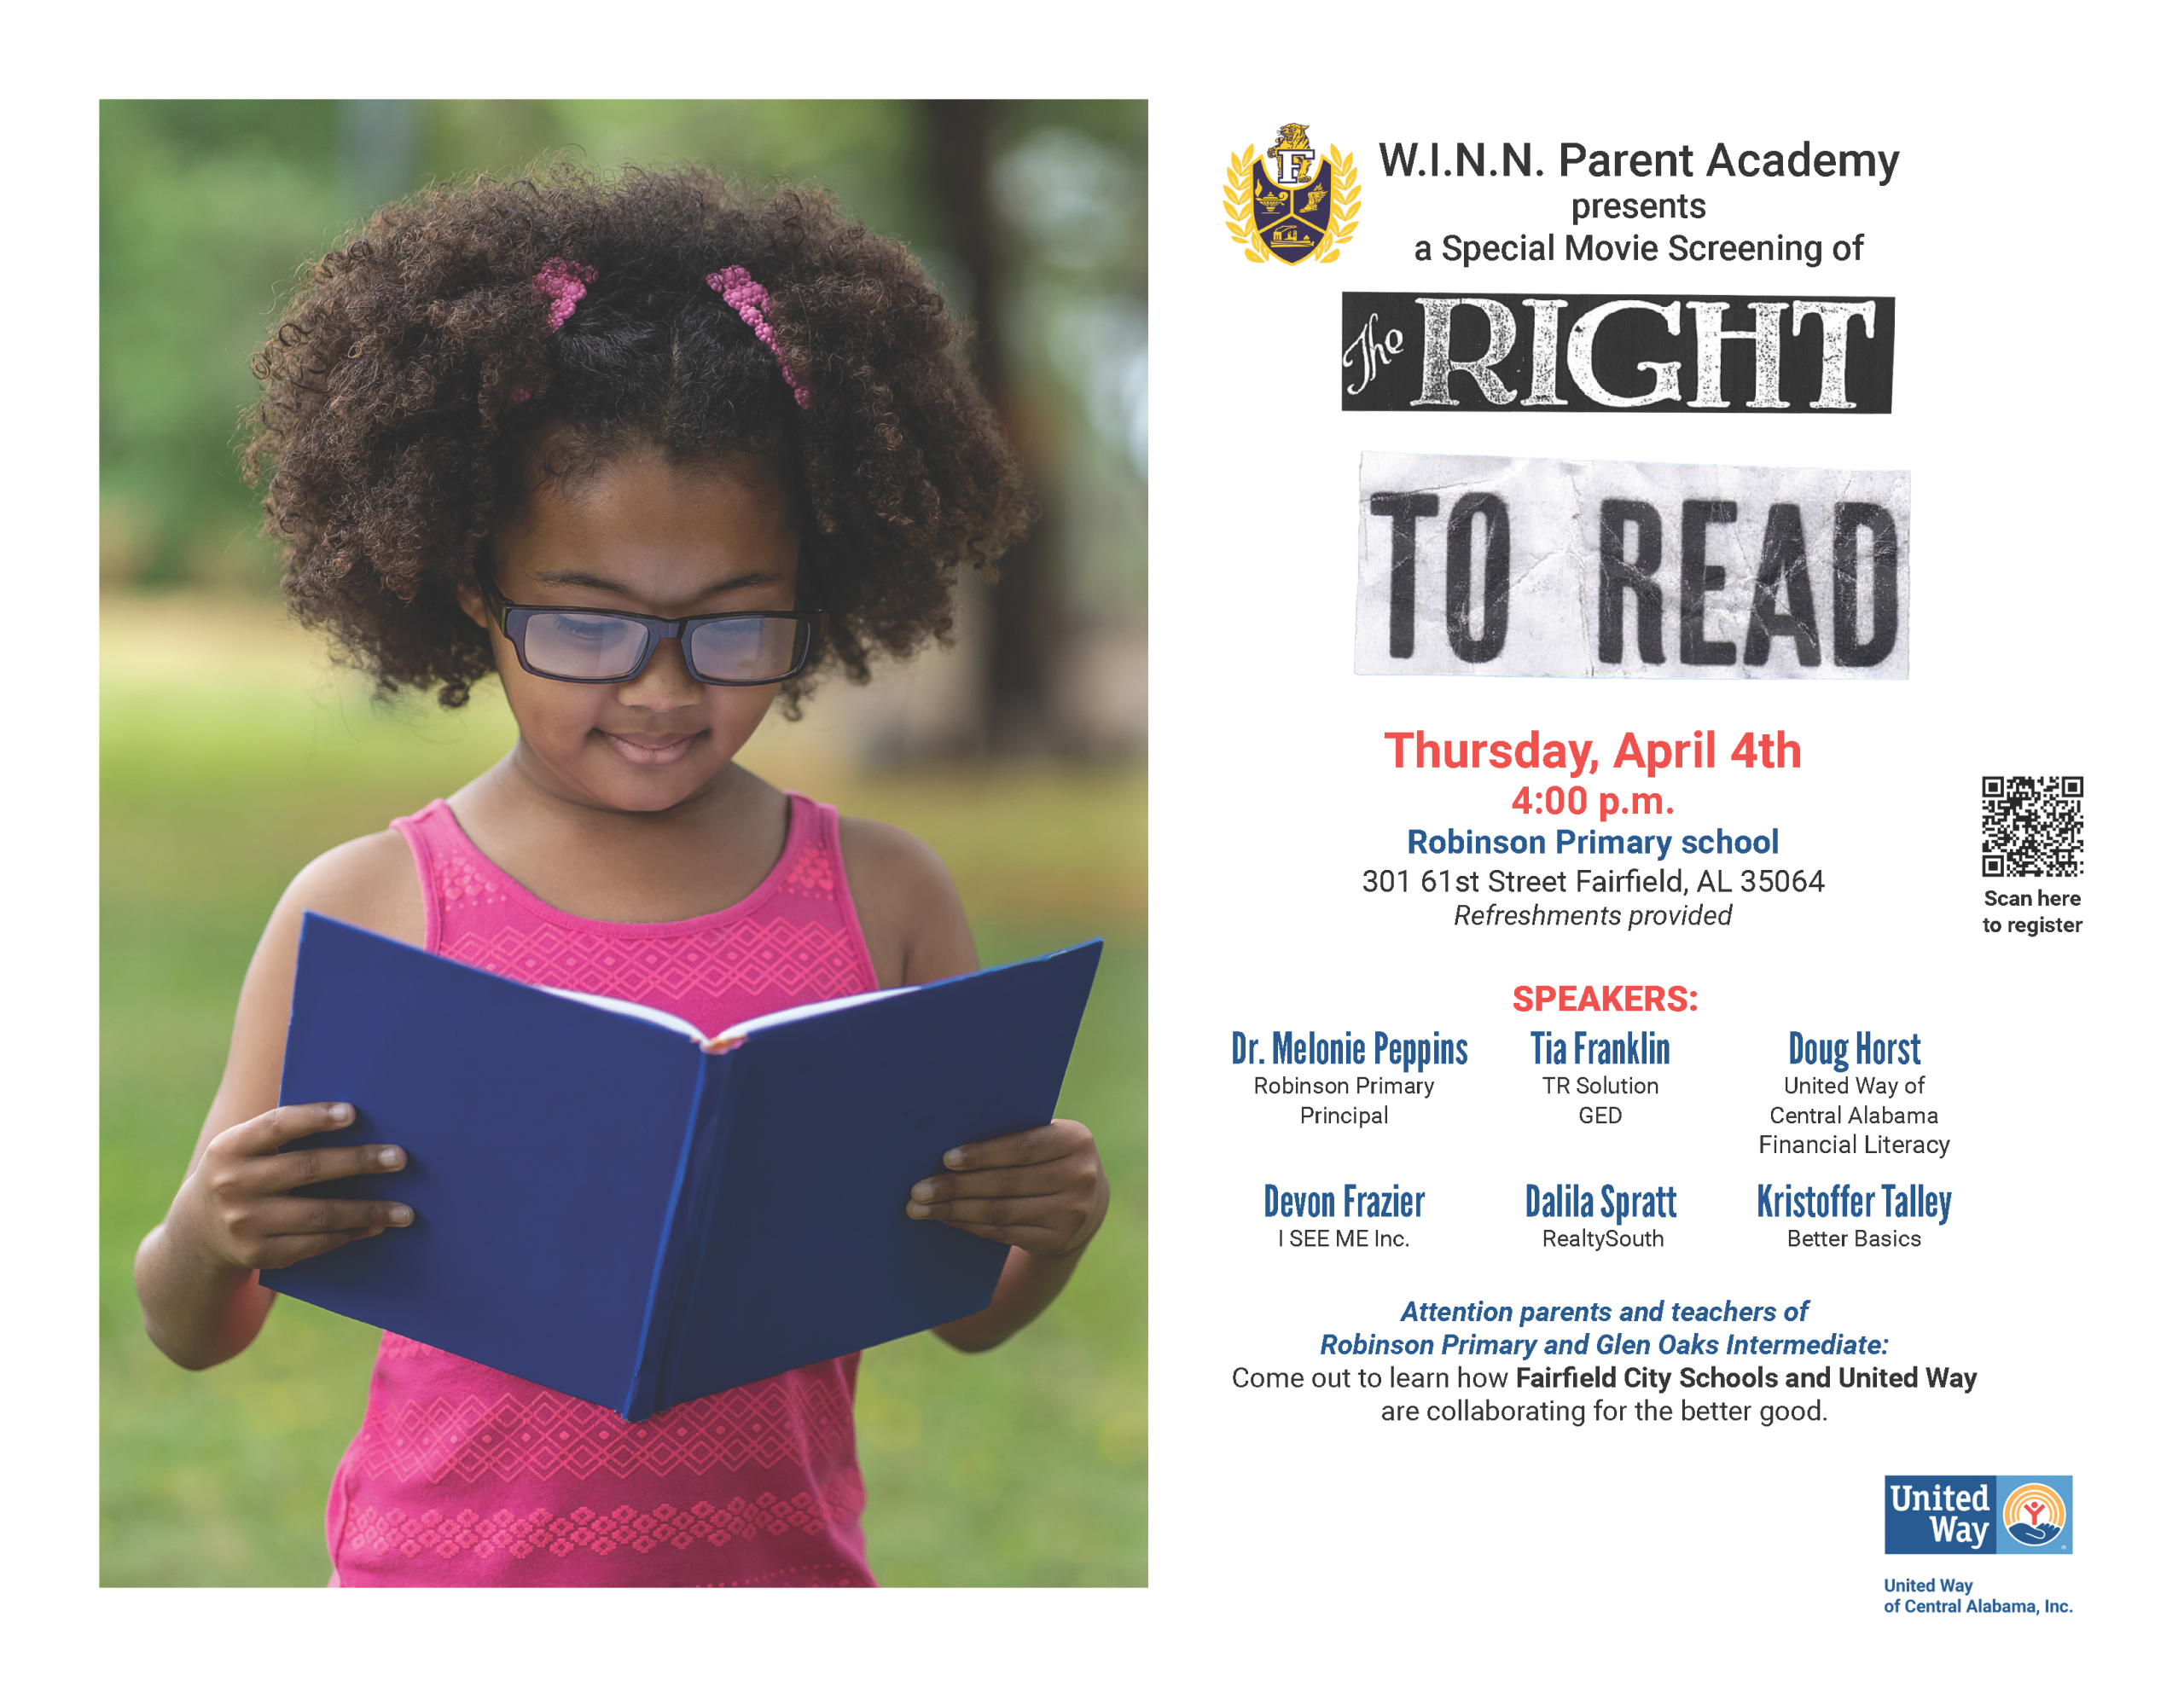 W.I.N.N. Parent Academy presents a Special Movie Screening of Attention parents and teachers of Robinson Primary and Glen Oaks Intermediate: Come out to learn how Fairfield City Schools and United Way are collaborating for the better good.